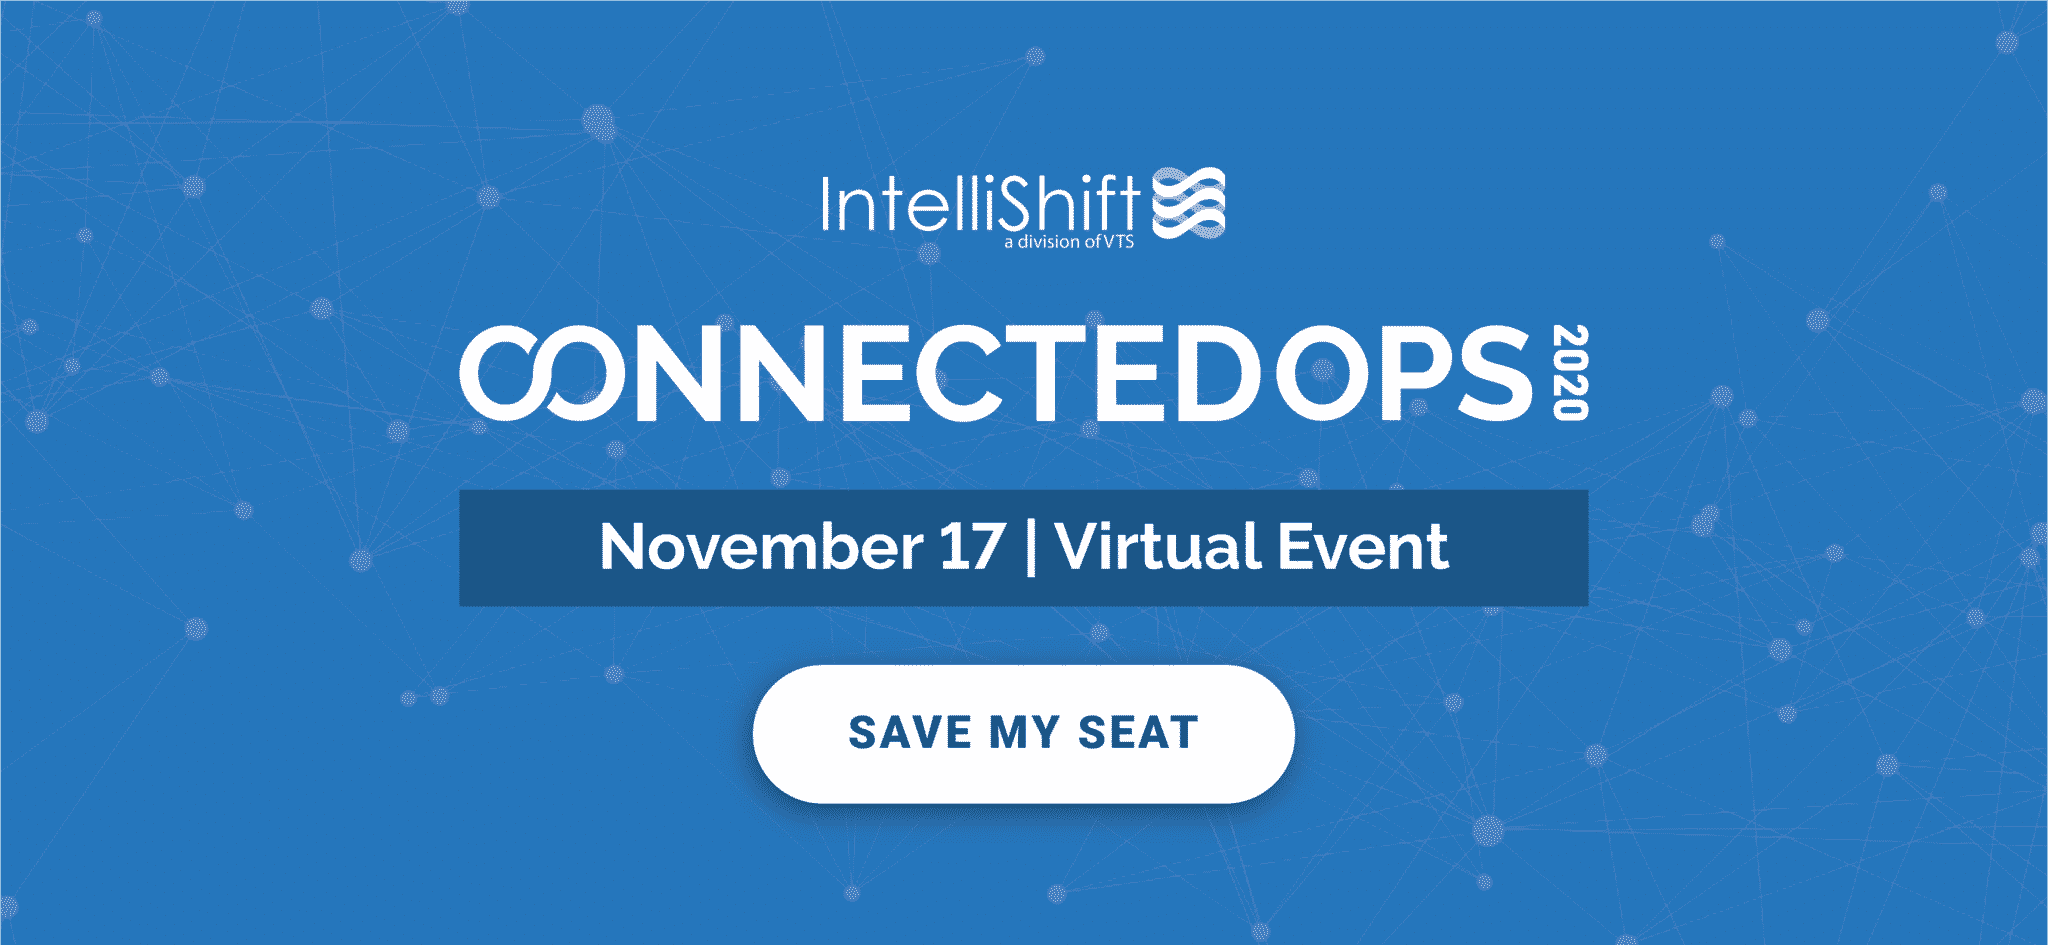 Announcing ConnectedOps 2020: A Virtual Event for the IntelliShift Community